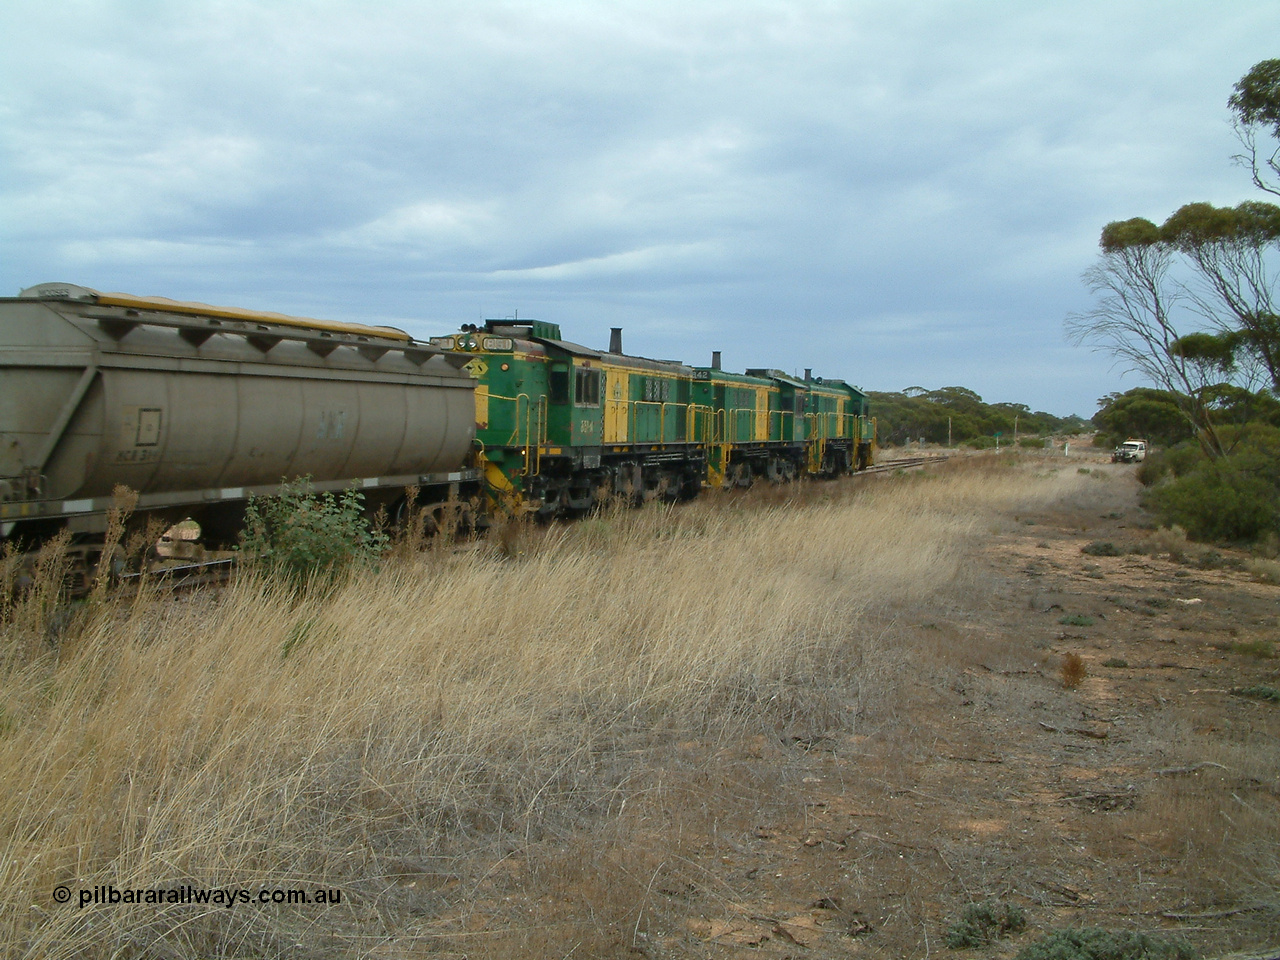 030407 092840
Yaninee, trailing view of an empty grain train behind a trio of former Australian National Co-Co locomotives with rebuilt former AE Goodwin ALCo model DL531 830 class ex 839, serial no. 83730, rebuilt by Port Augusta Workshops to DA class, leading two AE Goodwin ALCo model DL531 830 class units 842, serial no. 84140 and 851 serial no. 84137, 851 having been on the Eyre Peninsula since delivered in 1962, running express on the mainline. 7th April, 2003.
Keywords: DA-class;DA4;83730;Port-Augusta-WS;ALCo;DL531G/1;830-class;839;rebuild;